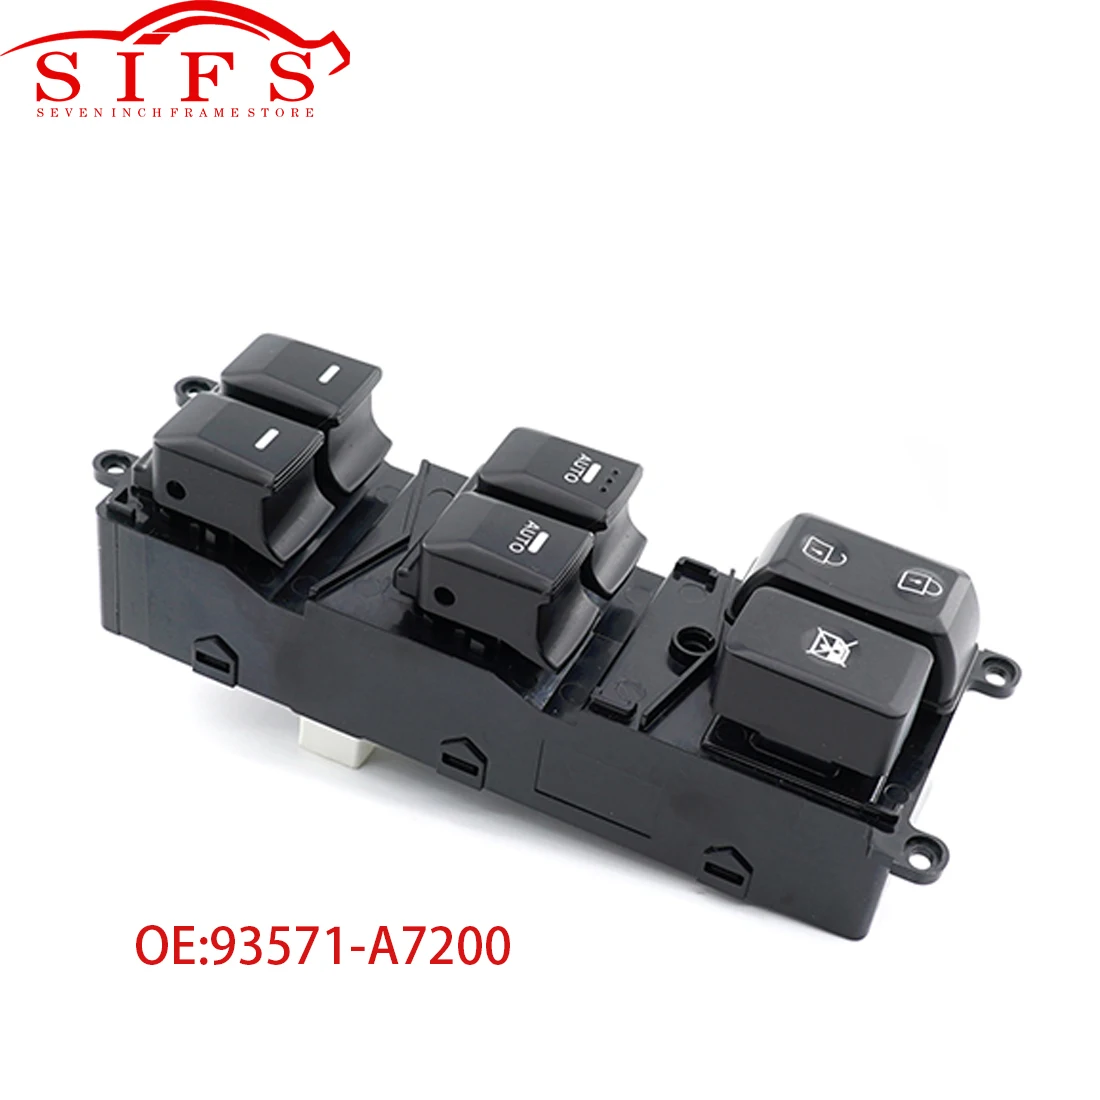 

HY Electric Power Master Window Control Switch For Kia Forte 2014-2018 93571-A7200